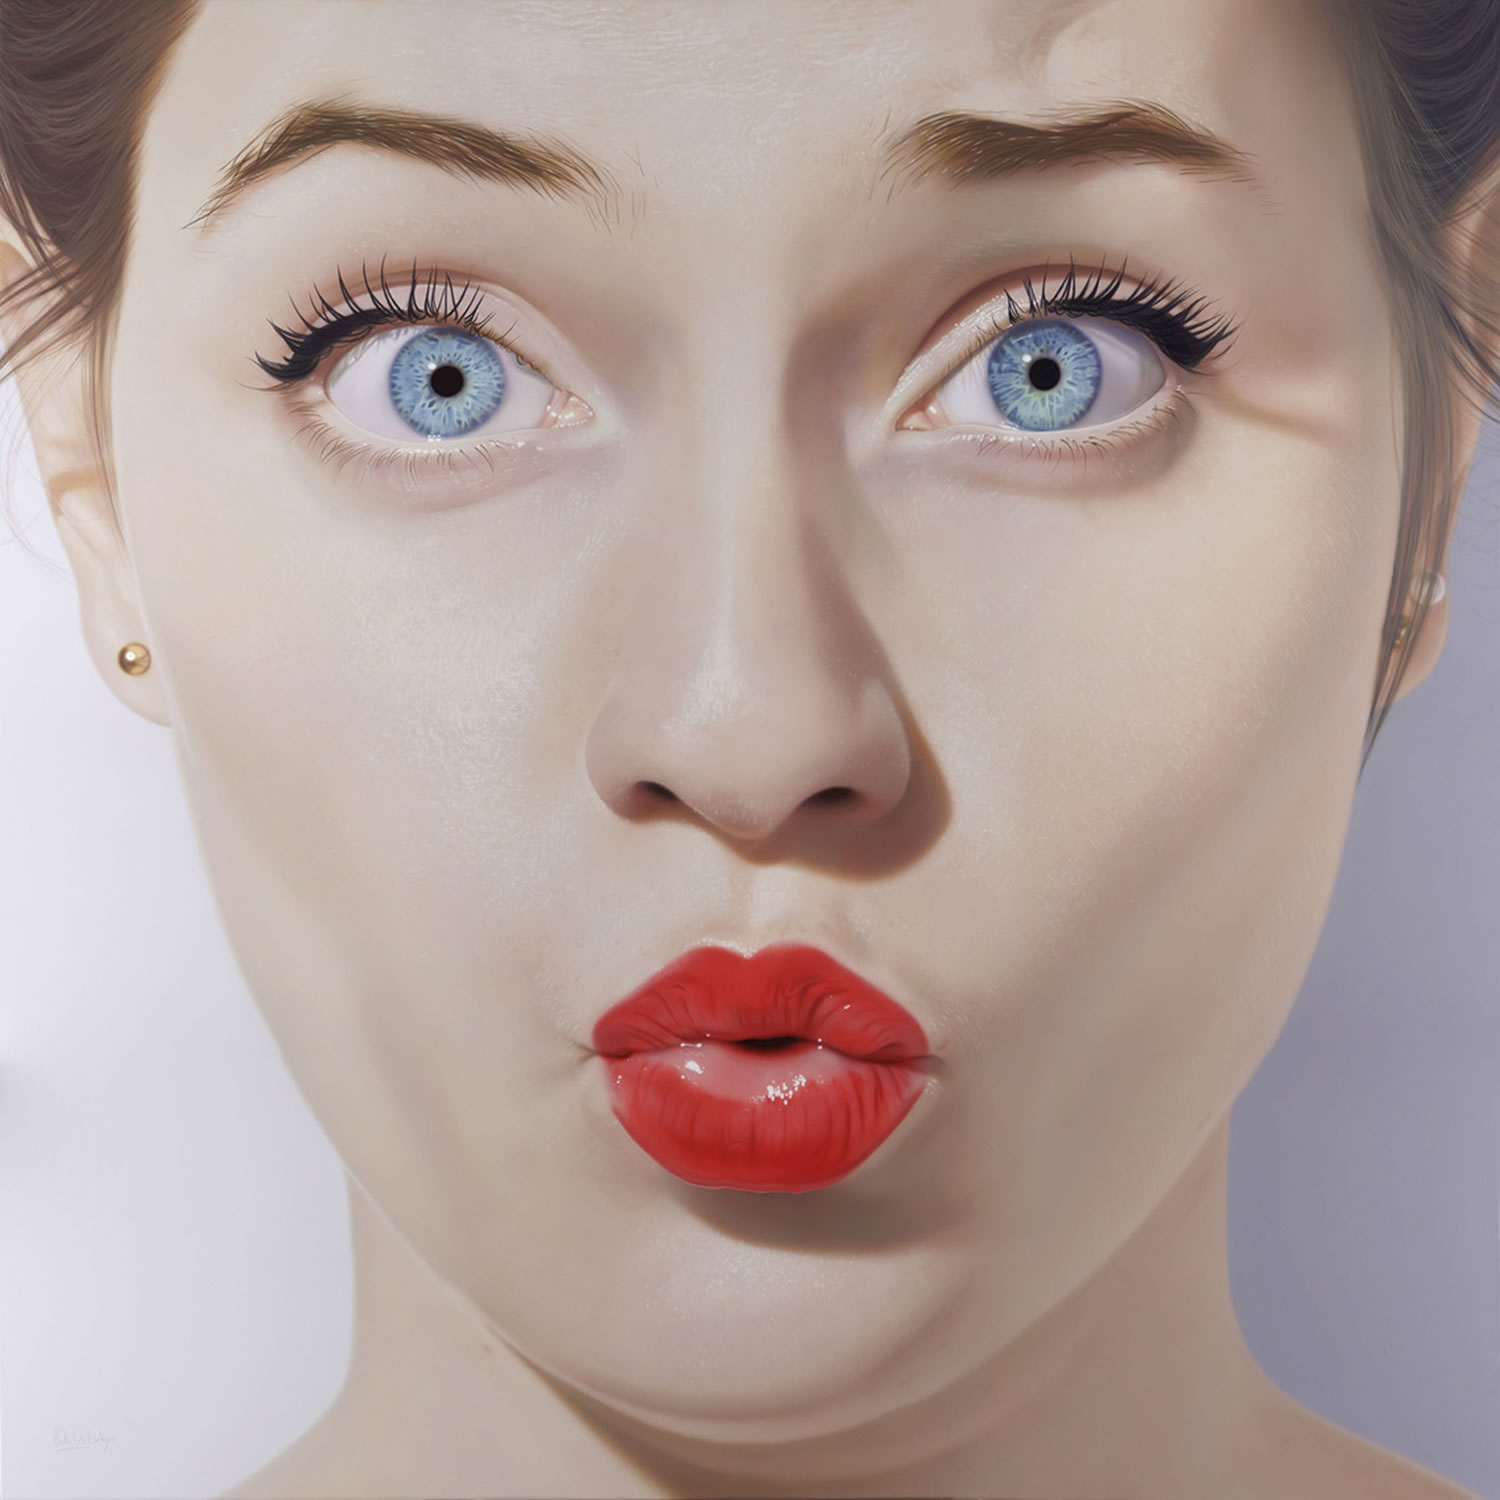 hyperreal painting by Hubert de Lartigue, woman with red lips